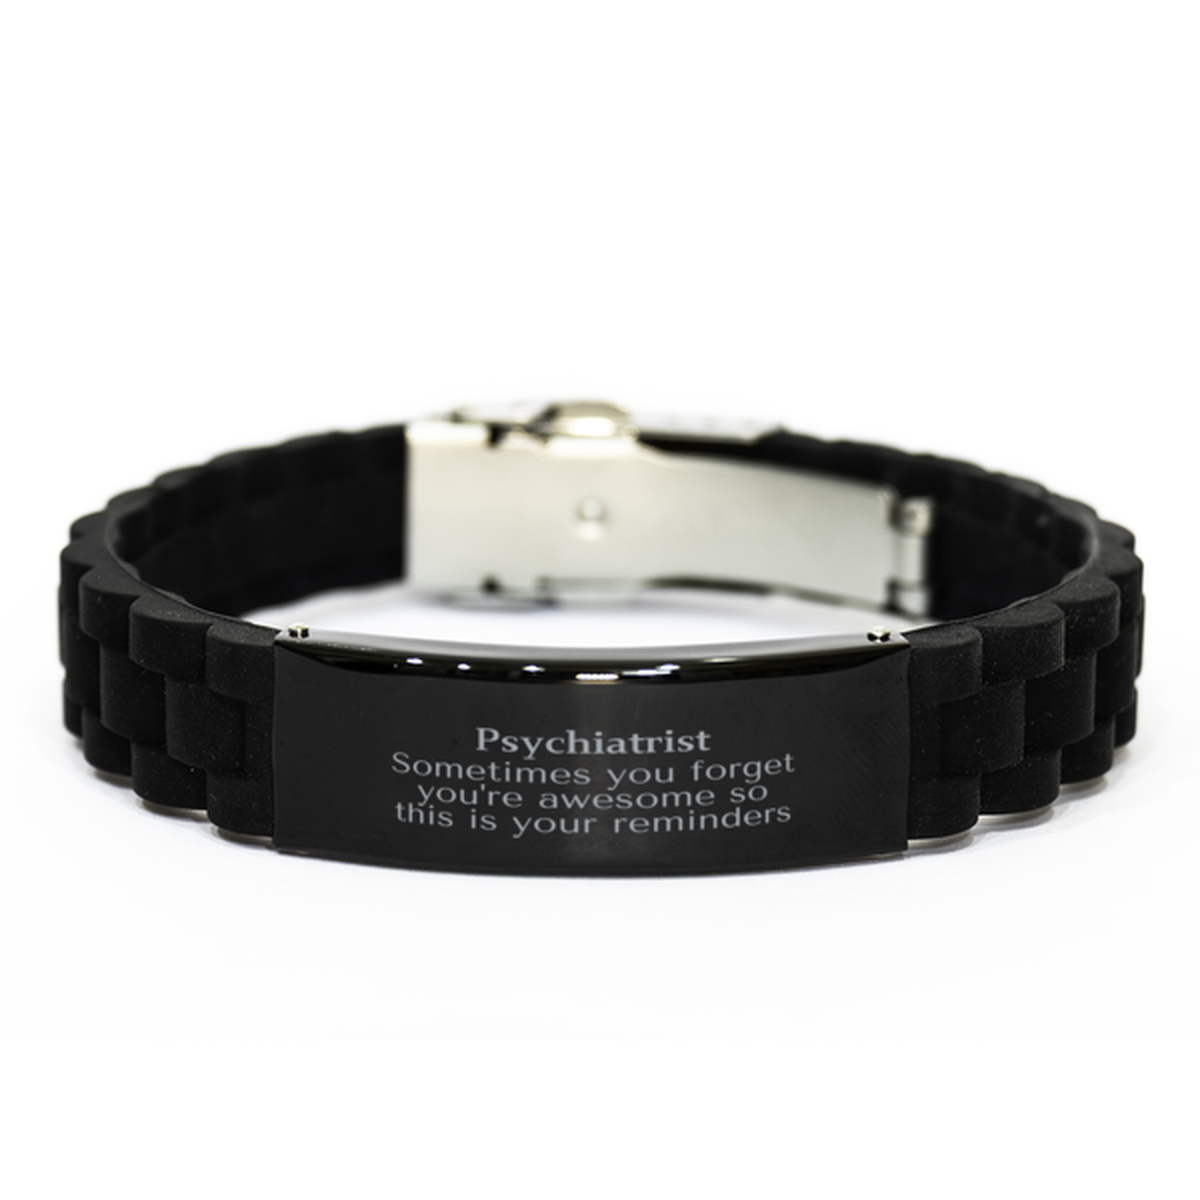 Sentimental Psychiatrist Black Glidelock Clasp Bracelet, Psychiatrist Sometimes you forget you're awesome so this is your reminders, Graduation Christmas Birthday Gifts for Psychiatrist, Men, Women, Coworkers